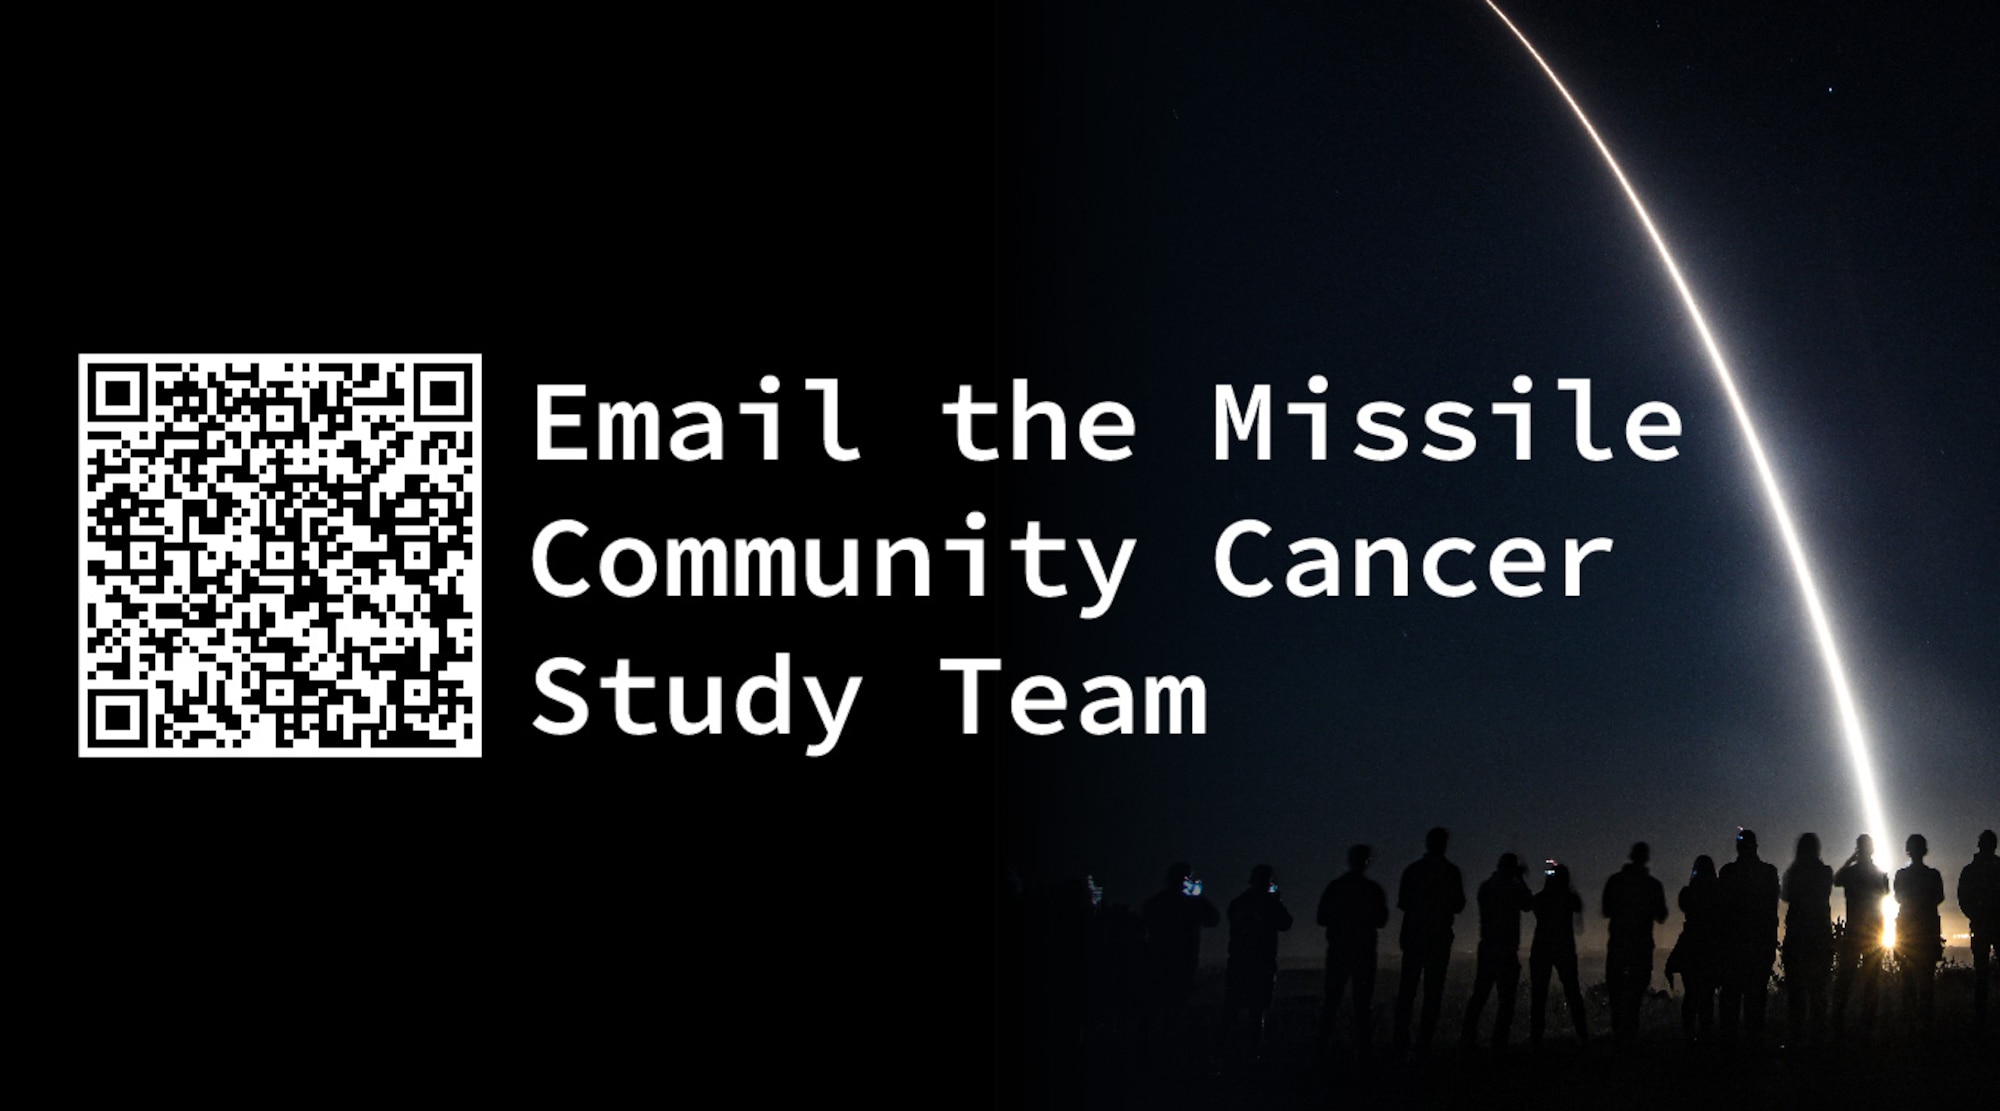 Airmen, Guardians and family members past and present from the Missile Community can scan the QR code if you have questions. The code will link you directly to an email that goes straight to the Missile Community Cancer Study team. (U.S. Air Force graphic by Staff Sgt. Shelby Thurman)